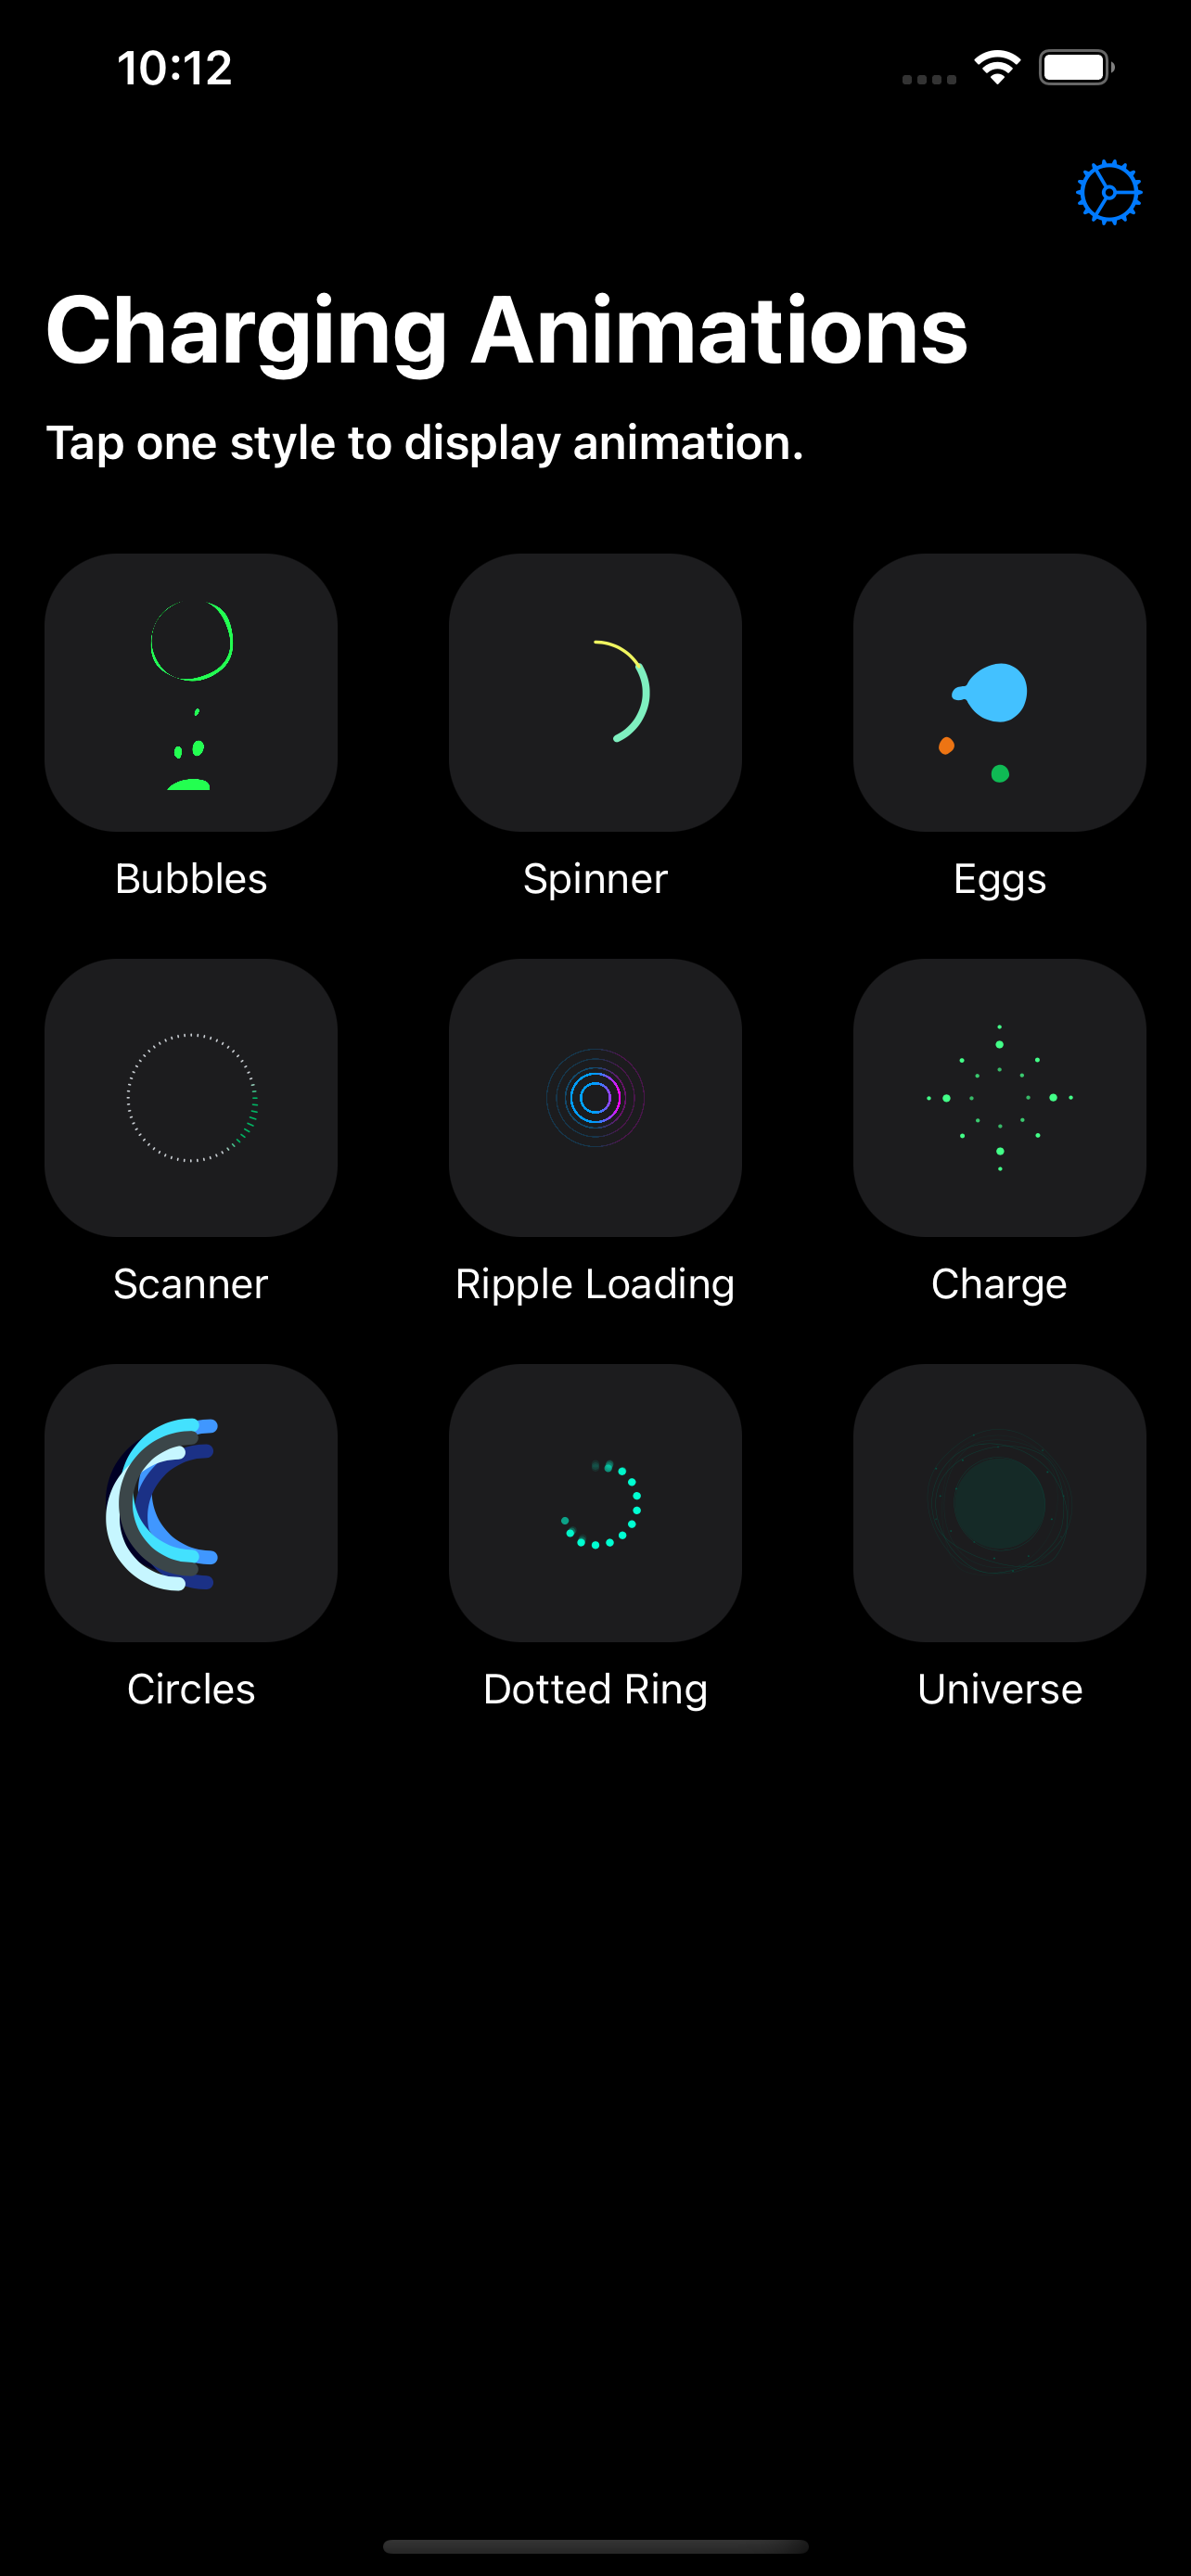 Charging Animations for iOS